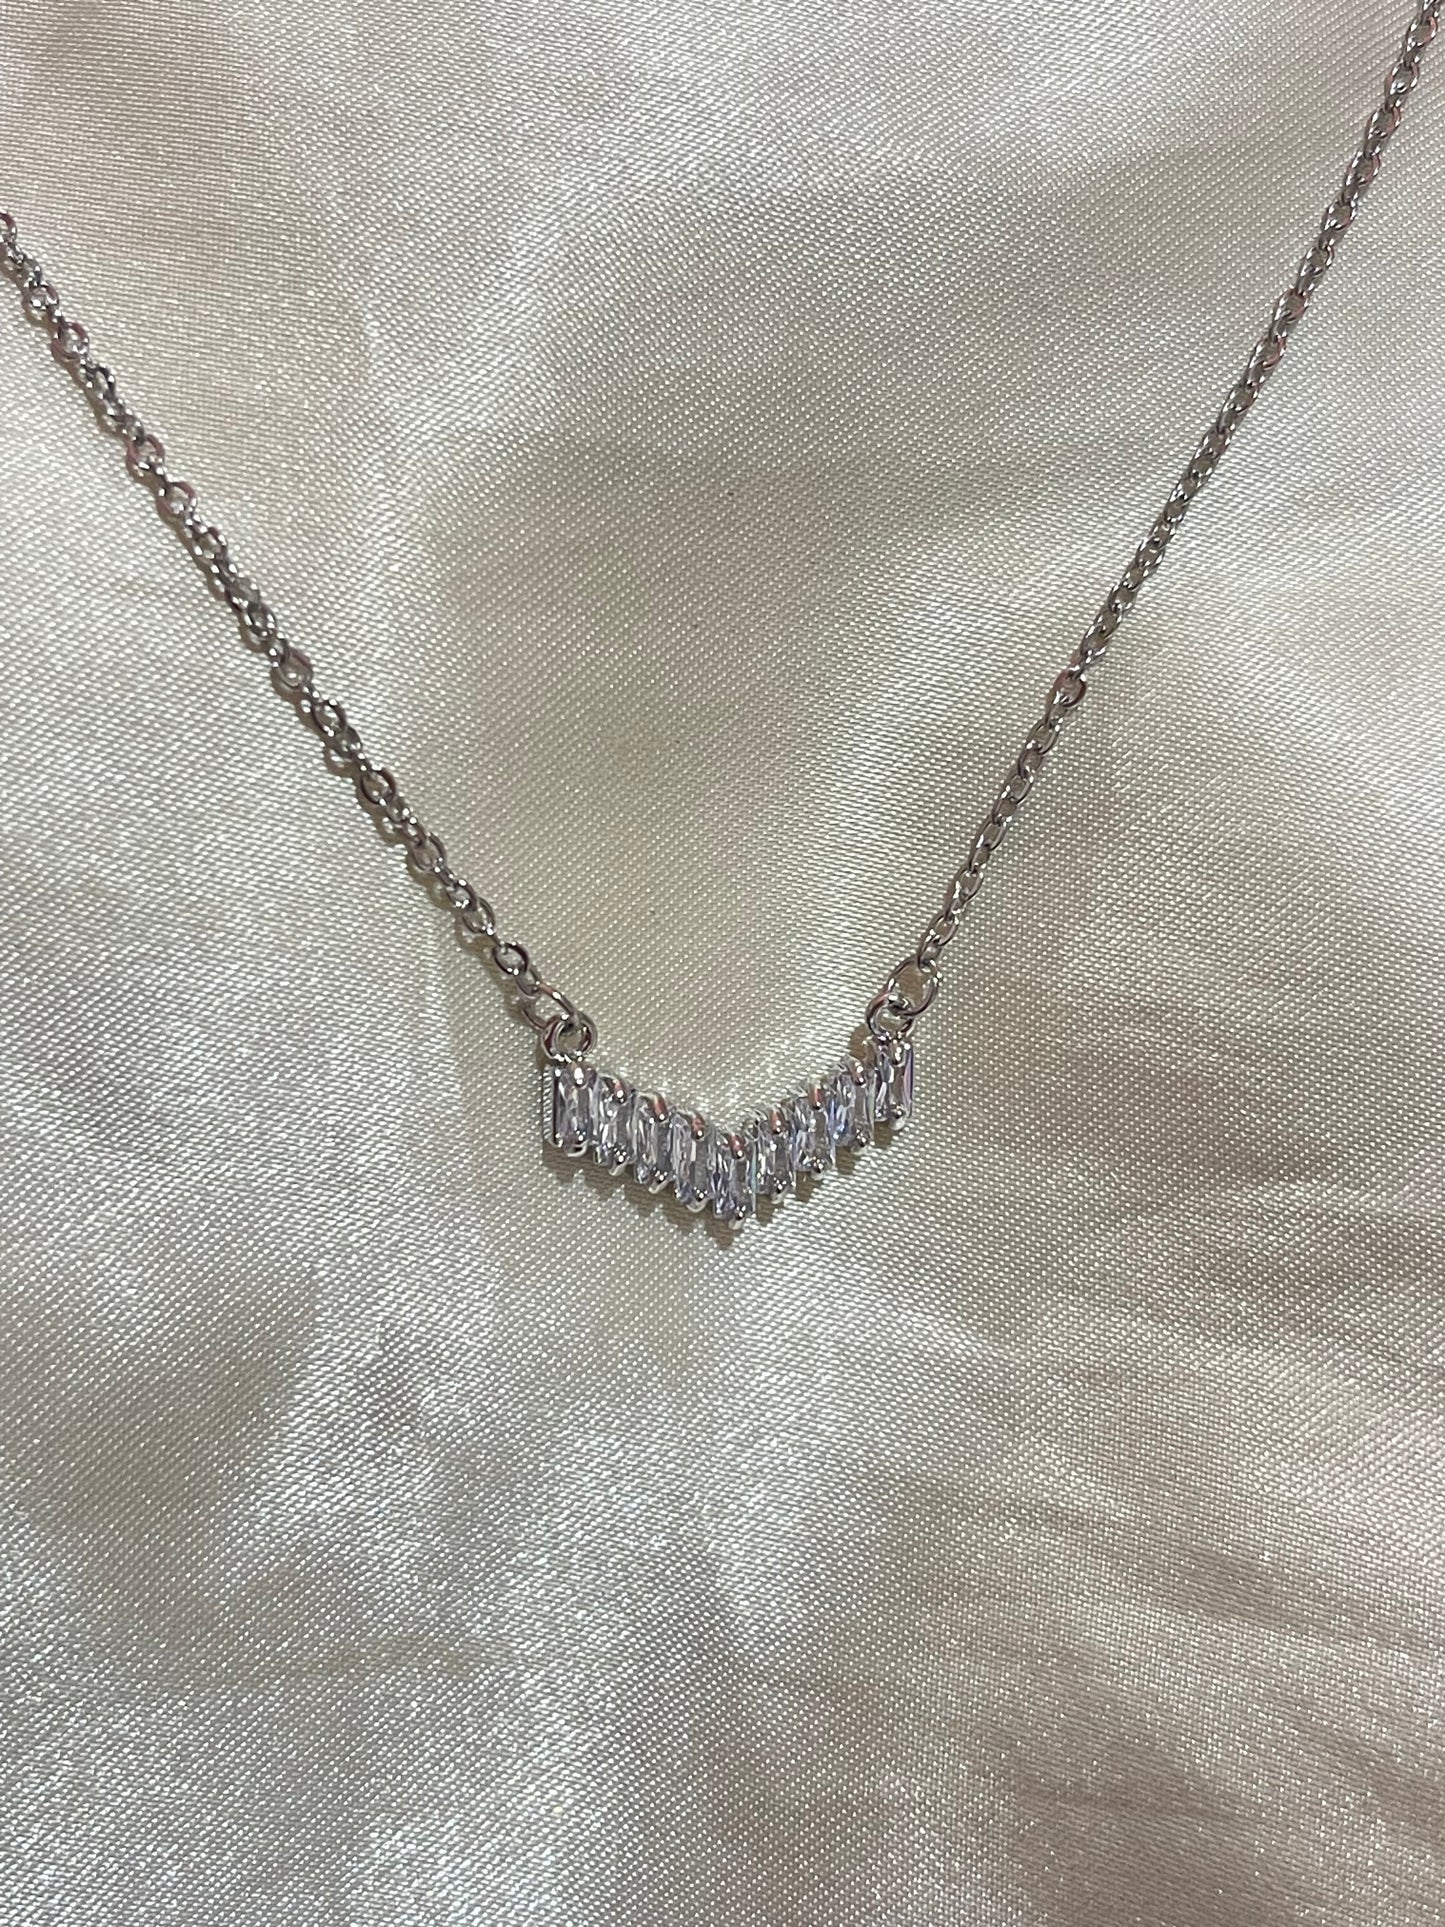 Pretty Crystal Necklace